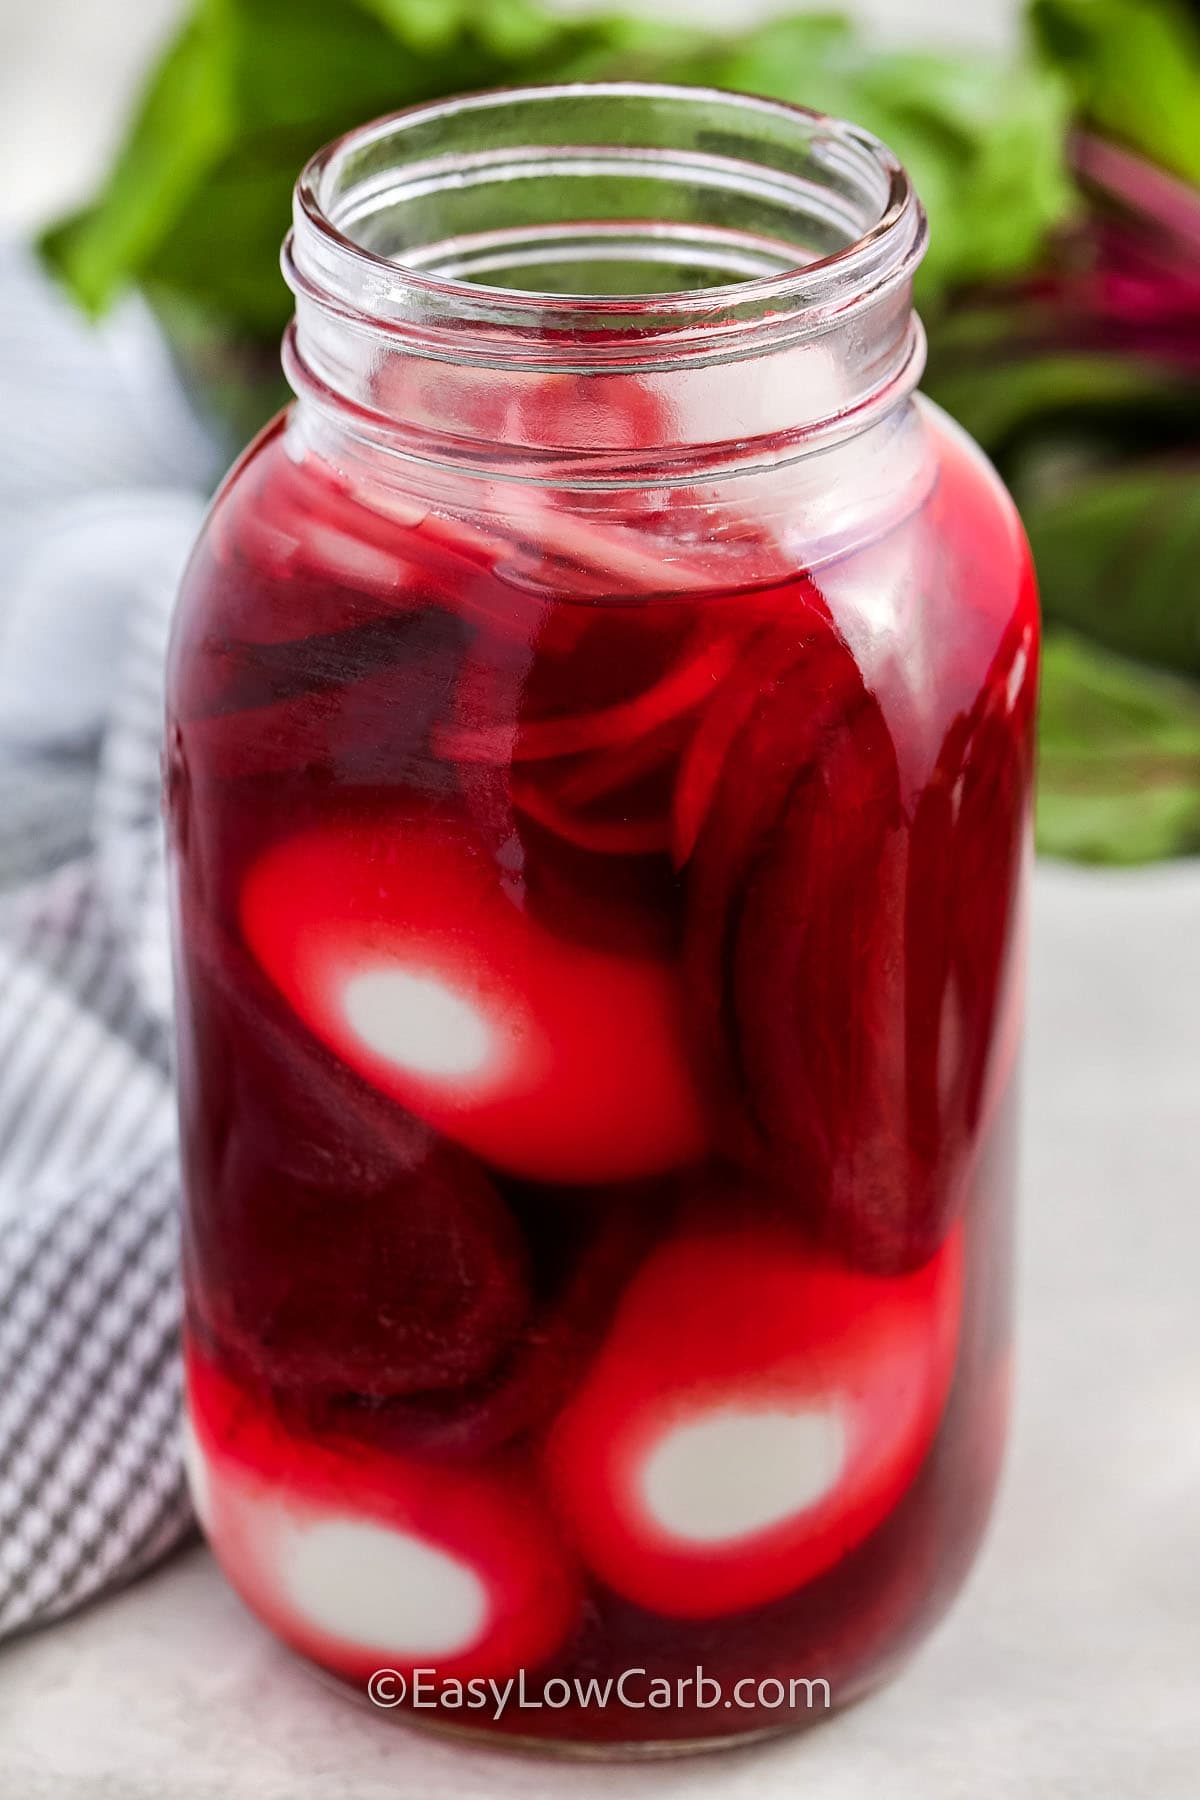 Pickled Eggs and Beets in glass jar